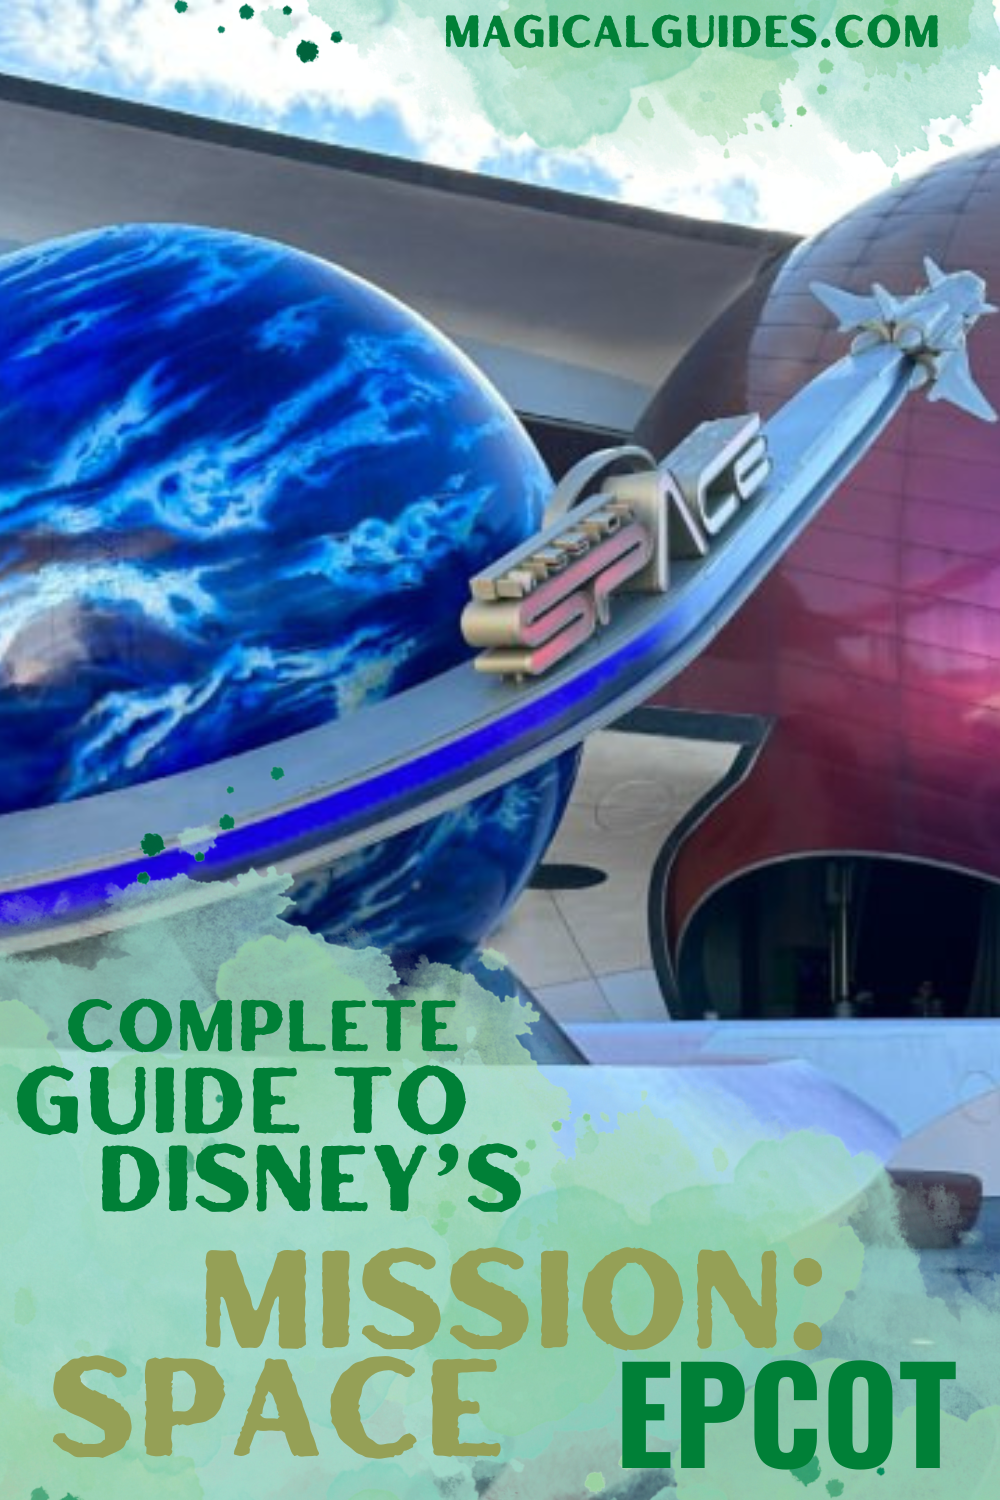 Everything you need to know about Disney World's Mission: Space Ride in EPCOT. Should you ride the green side or the orange side? Should you ride Mission Space? Find all the answers and more here!